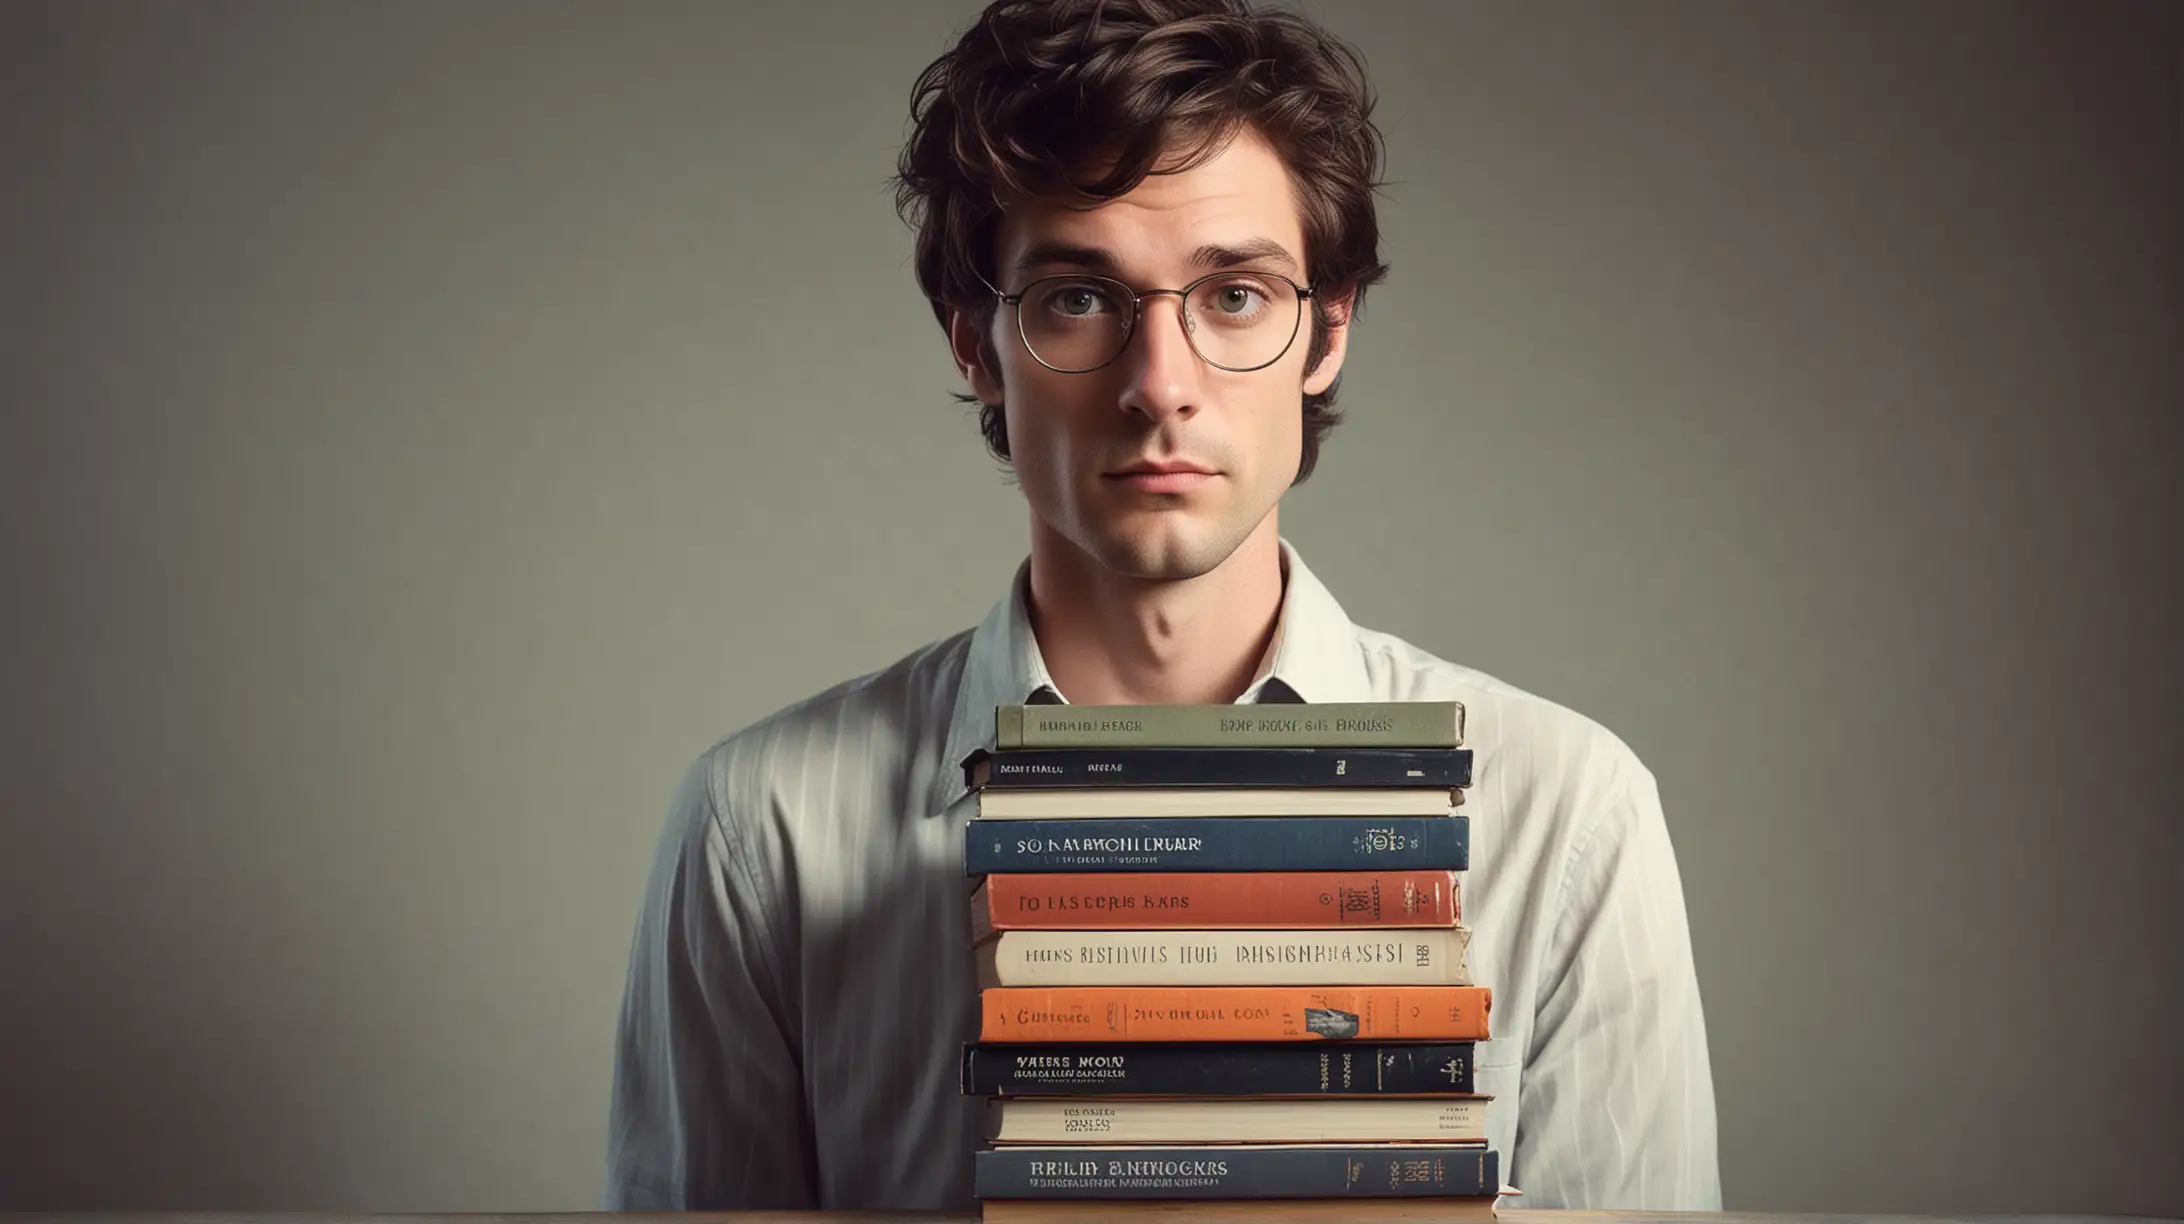 Classic portrait-style photography, skinny guy 30's, Trent Gill, timid, meek, highly intelligent, frightened, 1970's bushy hairstyle, holding stack of hard cover books on physics, photo realistic, cinematic lighting